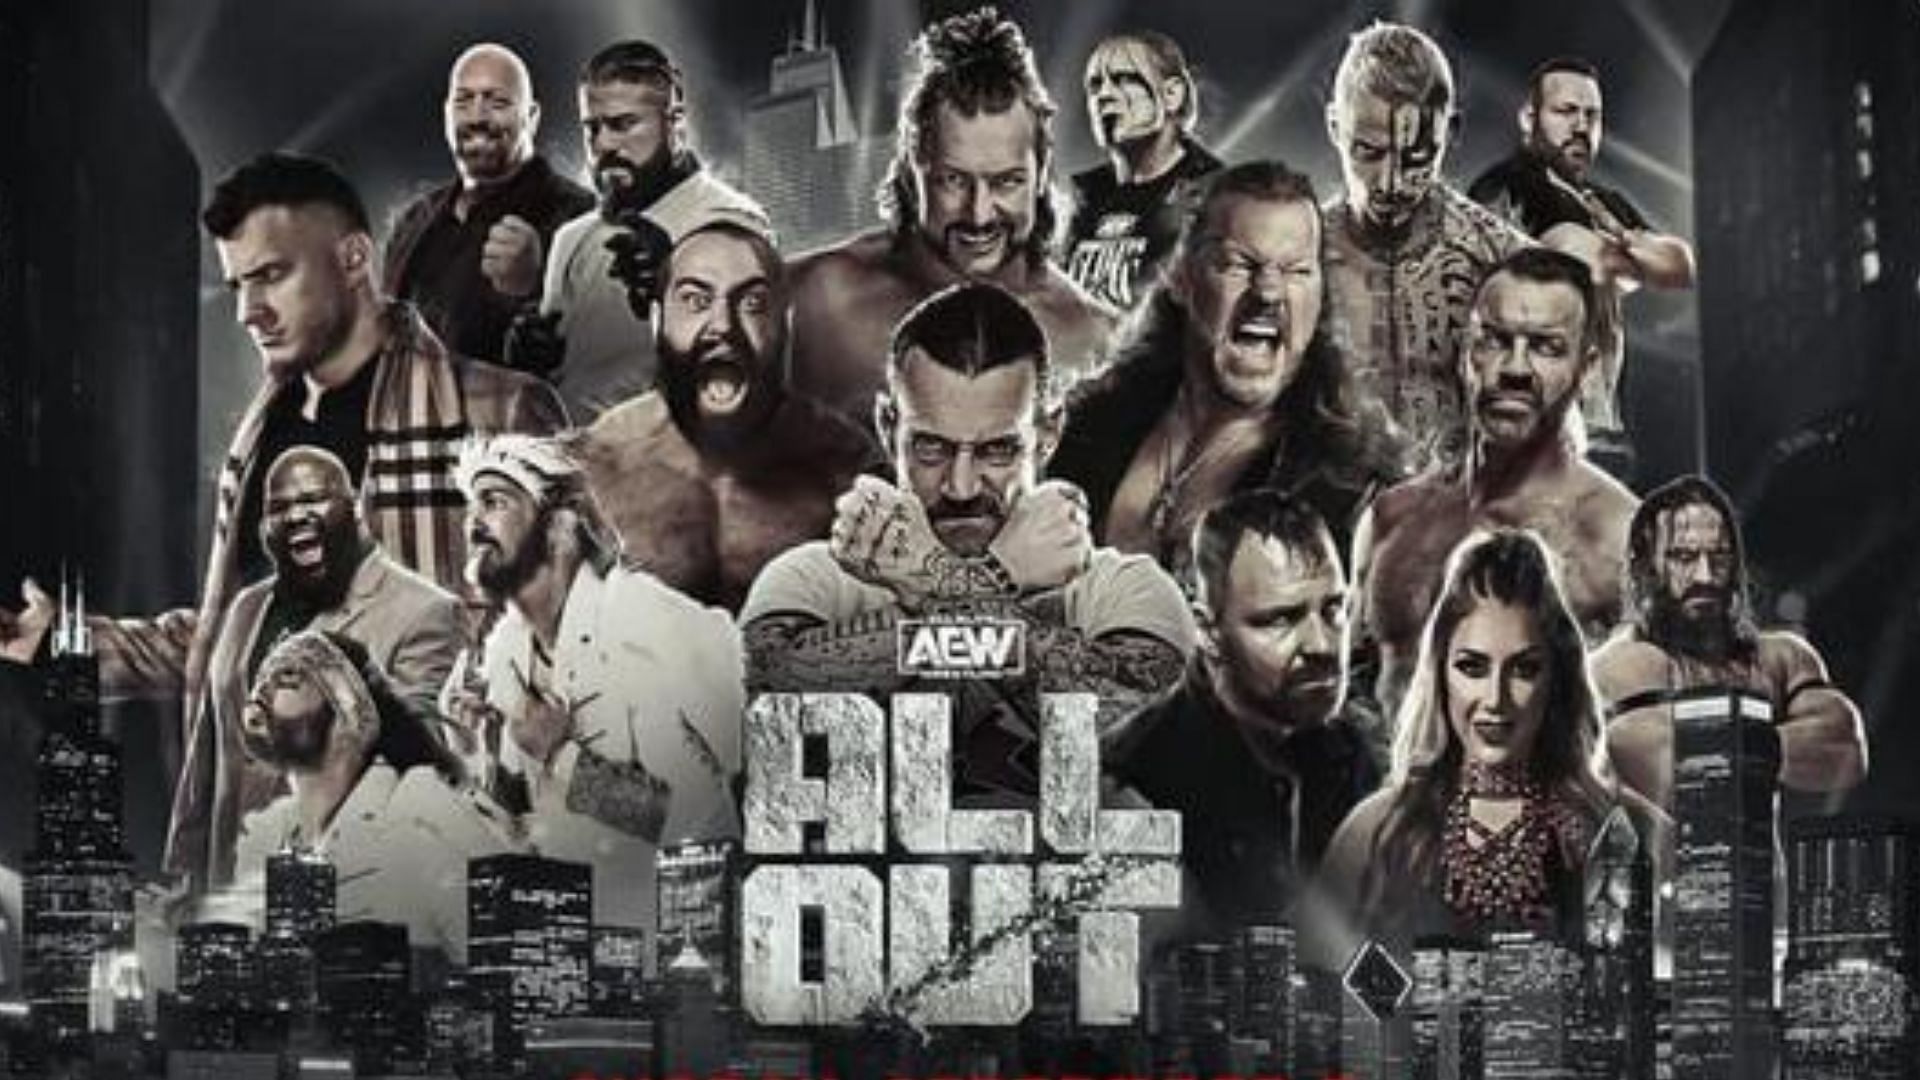 All Out is one of the four major annual events AEW hosts